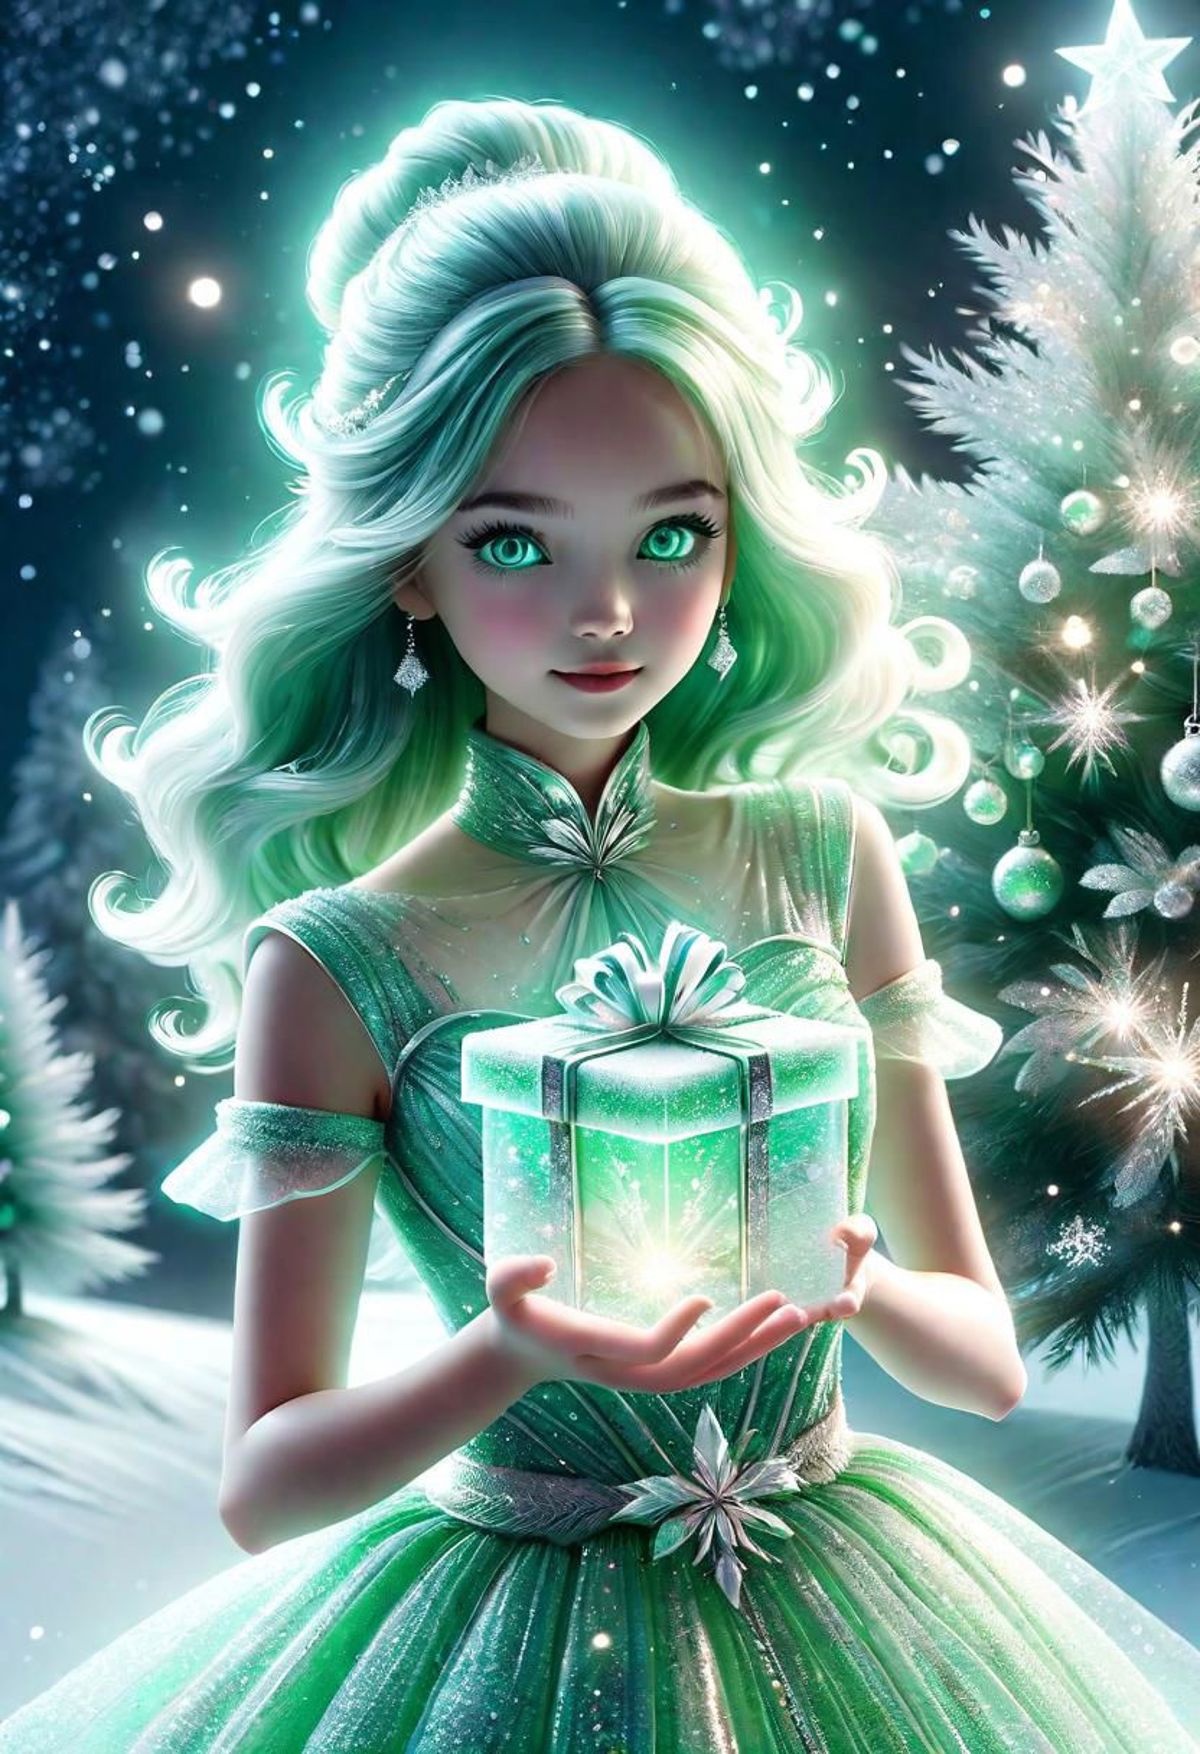 An Elf Girl with Green Hair and Eyes Holds a Green Gift Box.